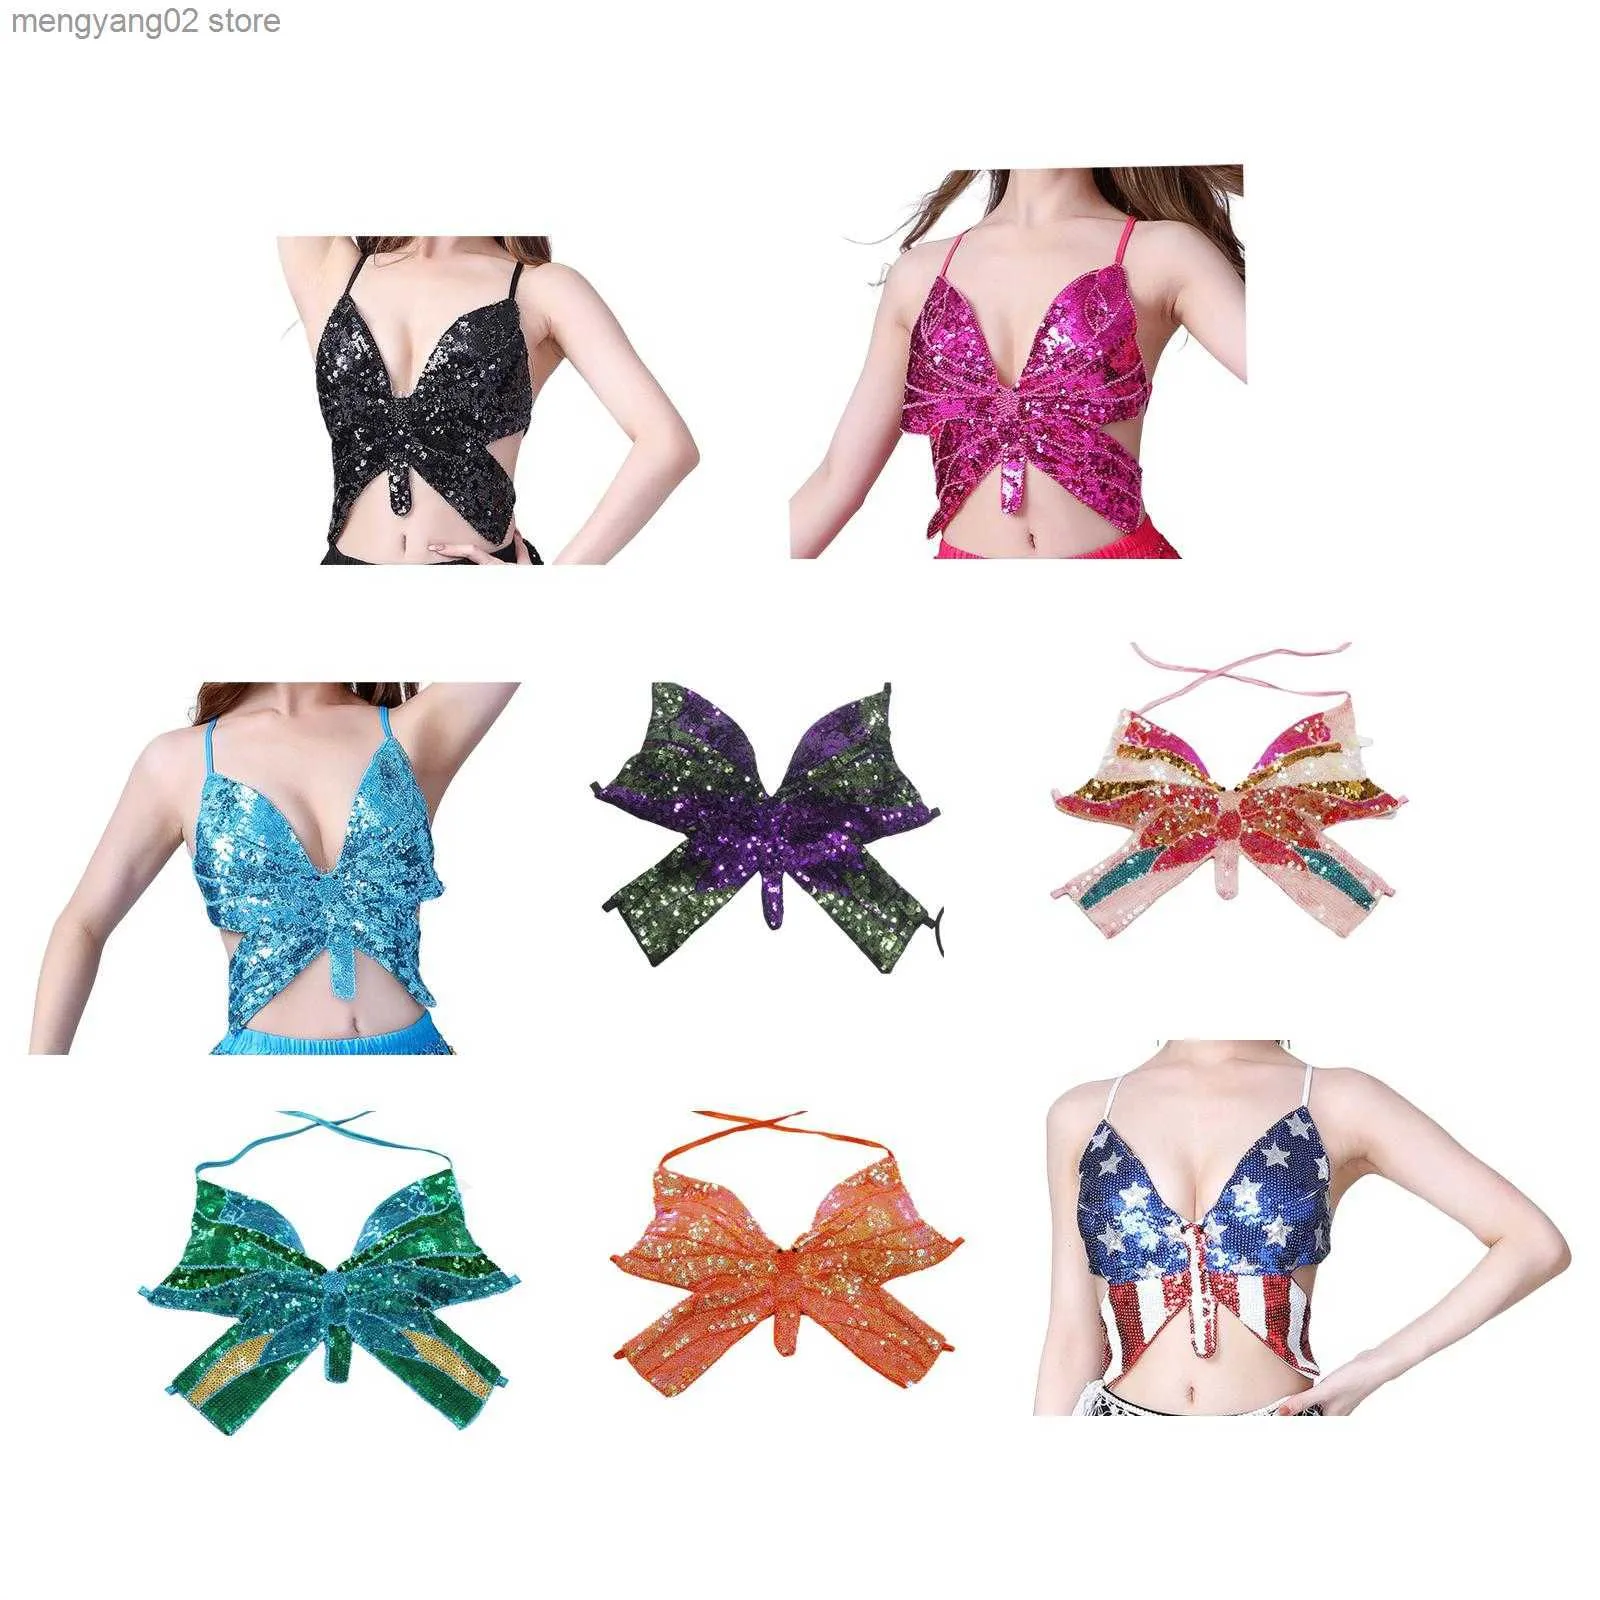 Glittering Reversible Sequin Butterfly Crop Top For Women Perfect For Club,  Tribal, Halloween, Rave, Party And Festival Wear T230517 From Mengyang02,  $4.96